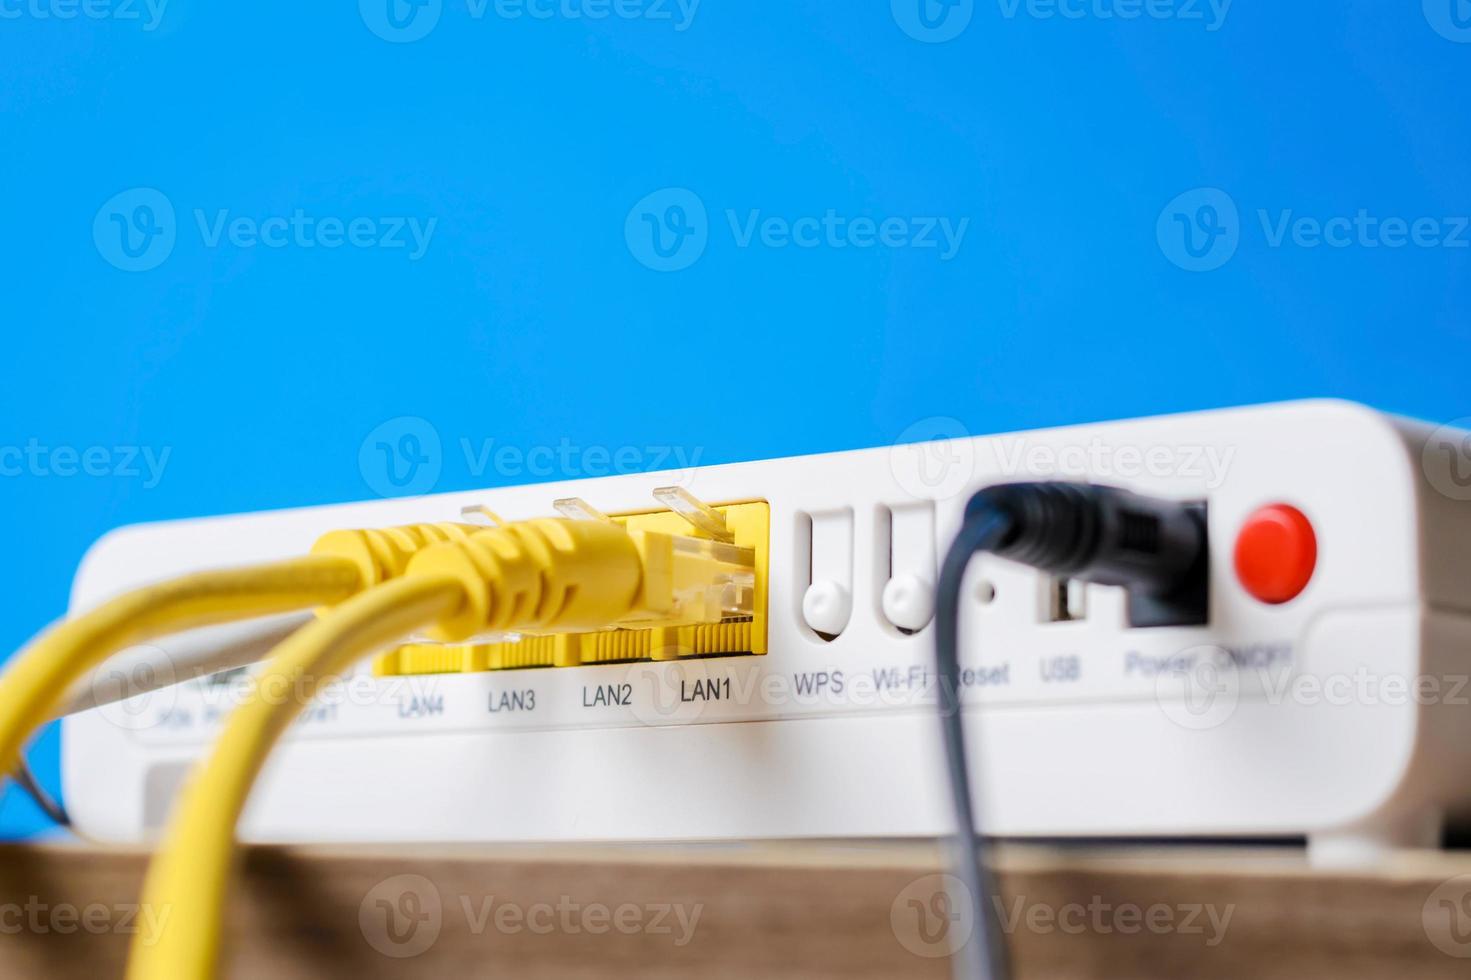 home wireless router with ethernet cables plugged in, closeup photo